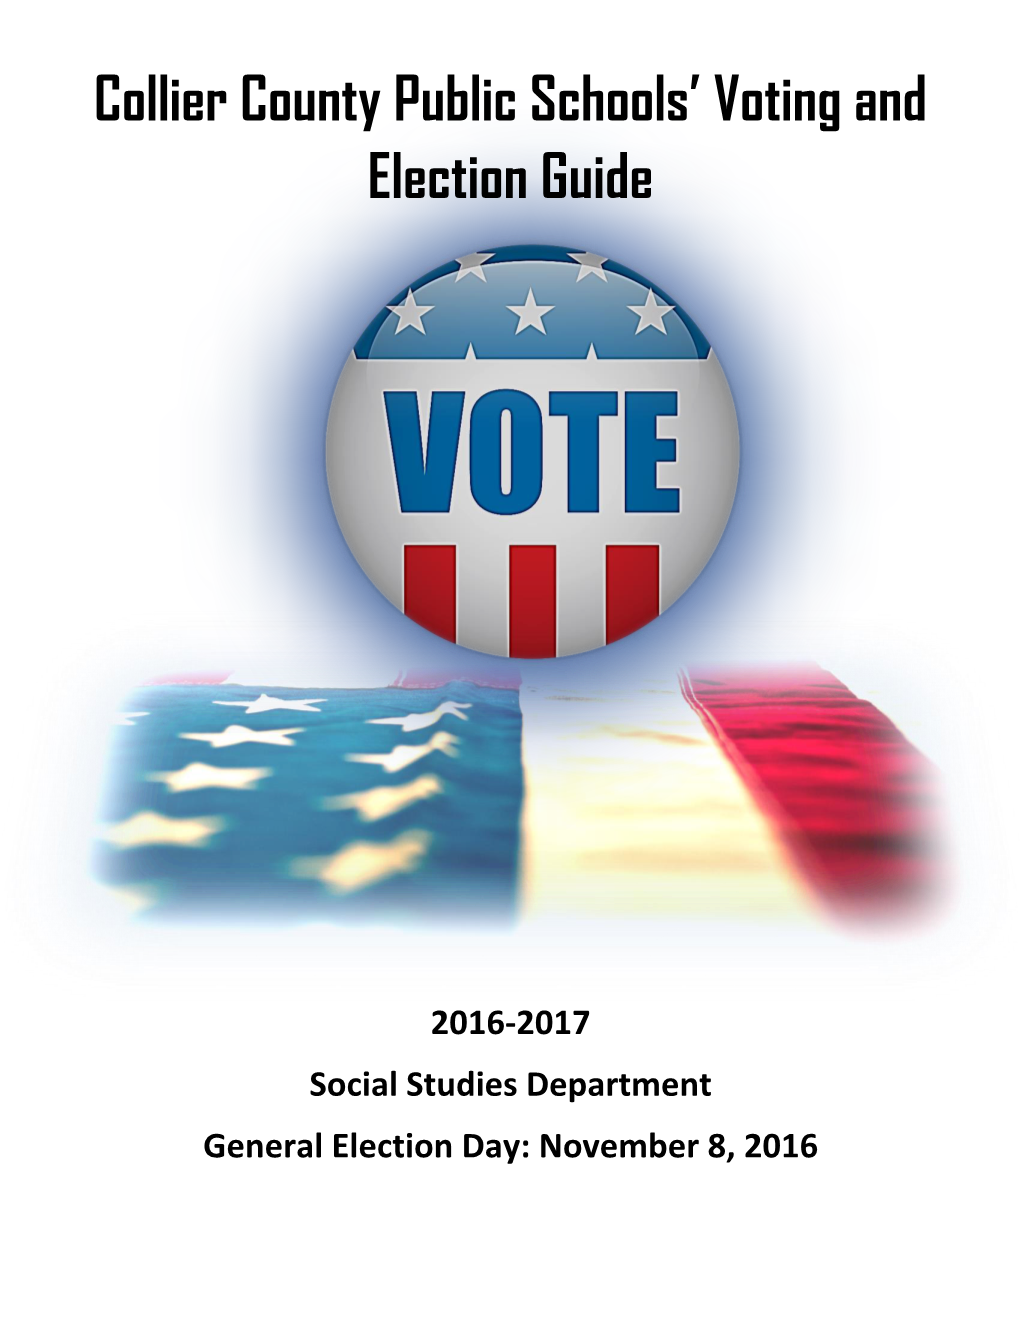 Collier County Public Schools' Voting and Election Guide